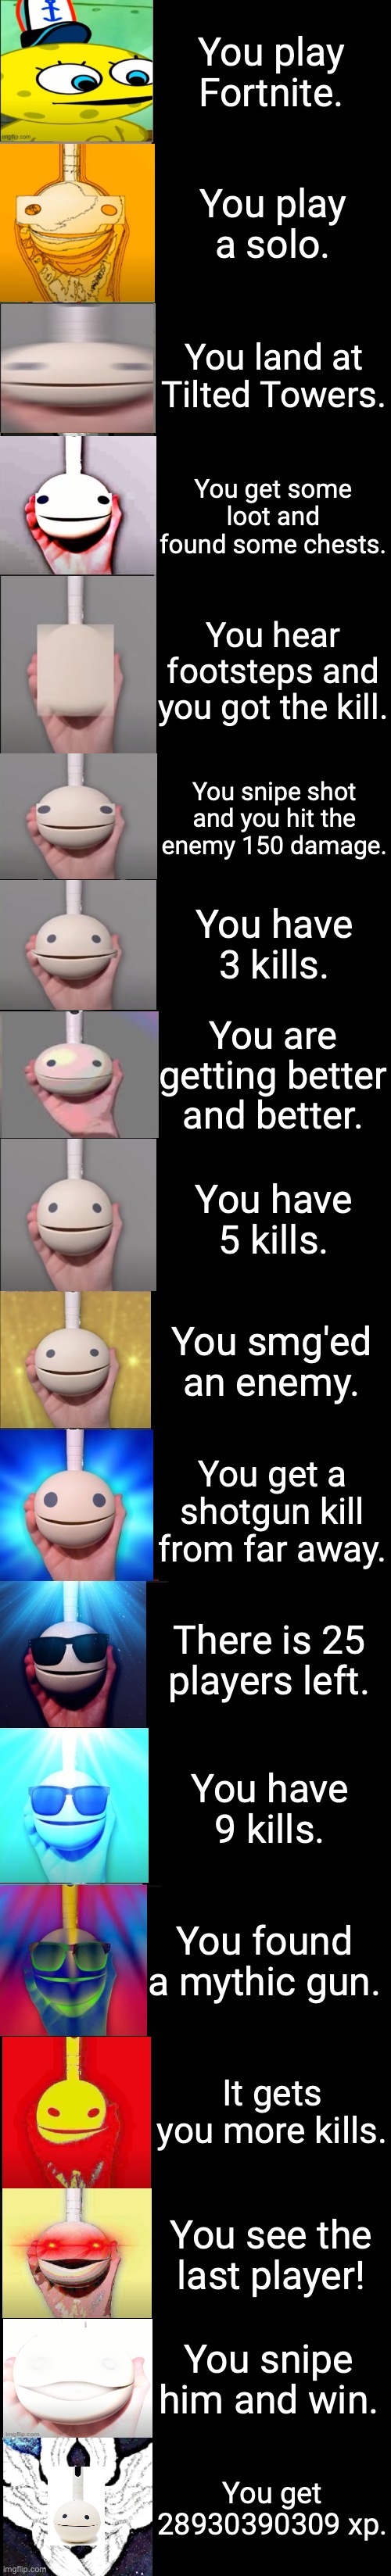 Otamatone becoming idiot to canny (just images) | You play Fortnite. You play a solo. You land at Tilted Towers. You get some loot and found some chests. You hear footsteps and you got the kill. You snipe shot and you hit the enemy 150 damage. You have 3 kills. You are getting better and better. You have 5 kills. You smg'ed an enemy. You get a shotgun kill from far away. There is 25 players left. You have 9 kills. You found a mythic gun. It gets you more kills. You see the last player! You snipe him and win. You get 28930390309 xp. | image tagged in otamatone becoming uncanny extended,otamatone becoming idiot to canny,wah wah | made w/ Imgflip meme maker